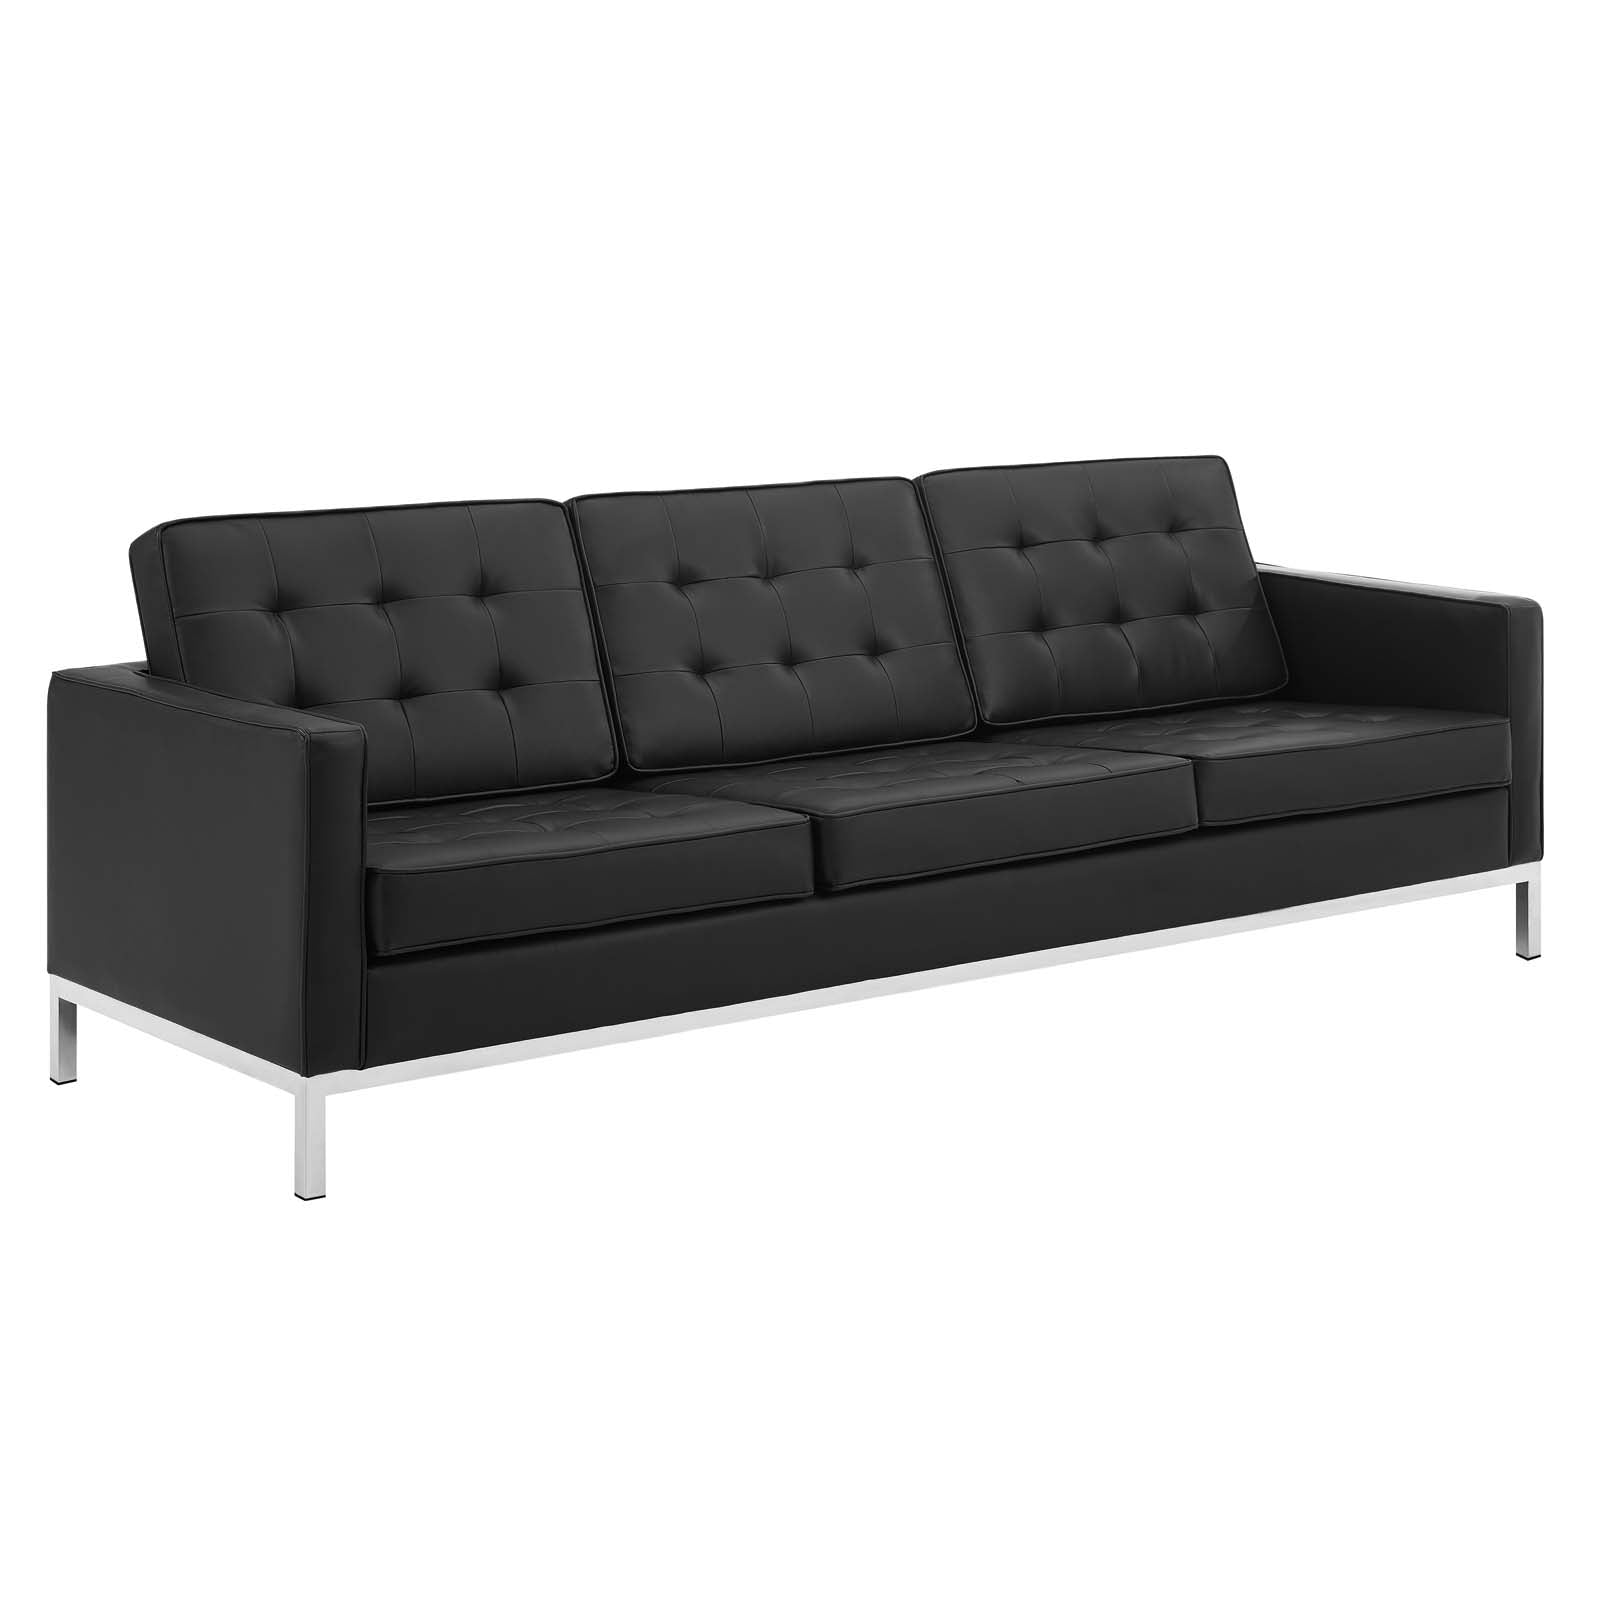 Modway Sofas & Couches - Loft-Tufted-Upholstered-Faux-Leather-Sofa-and-Armchair-Set-Silver-Black